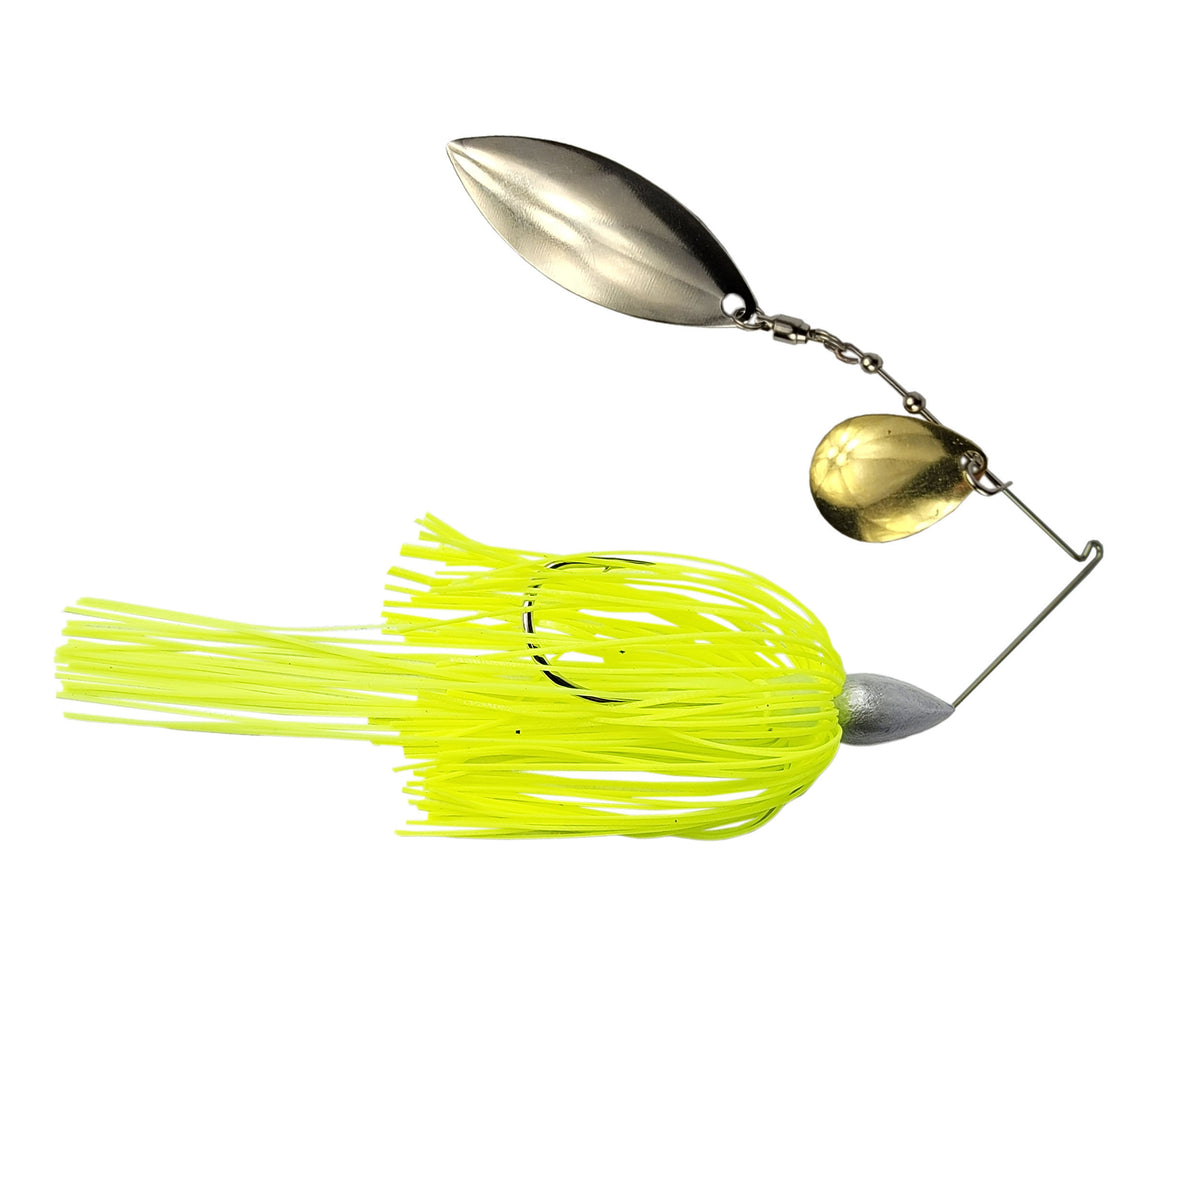 Tackle HD CS-II-CW Spinnerbait 3/4-Ounce - Chartreuse